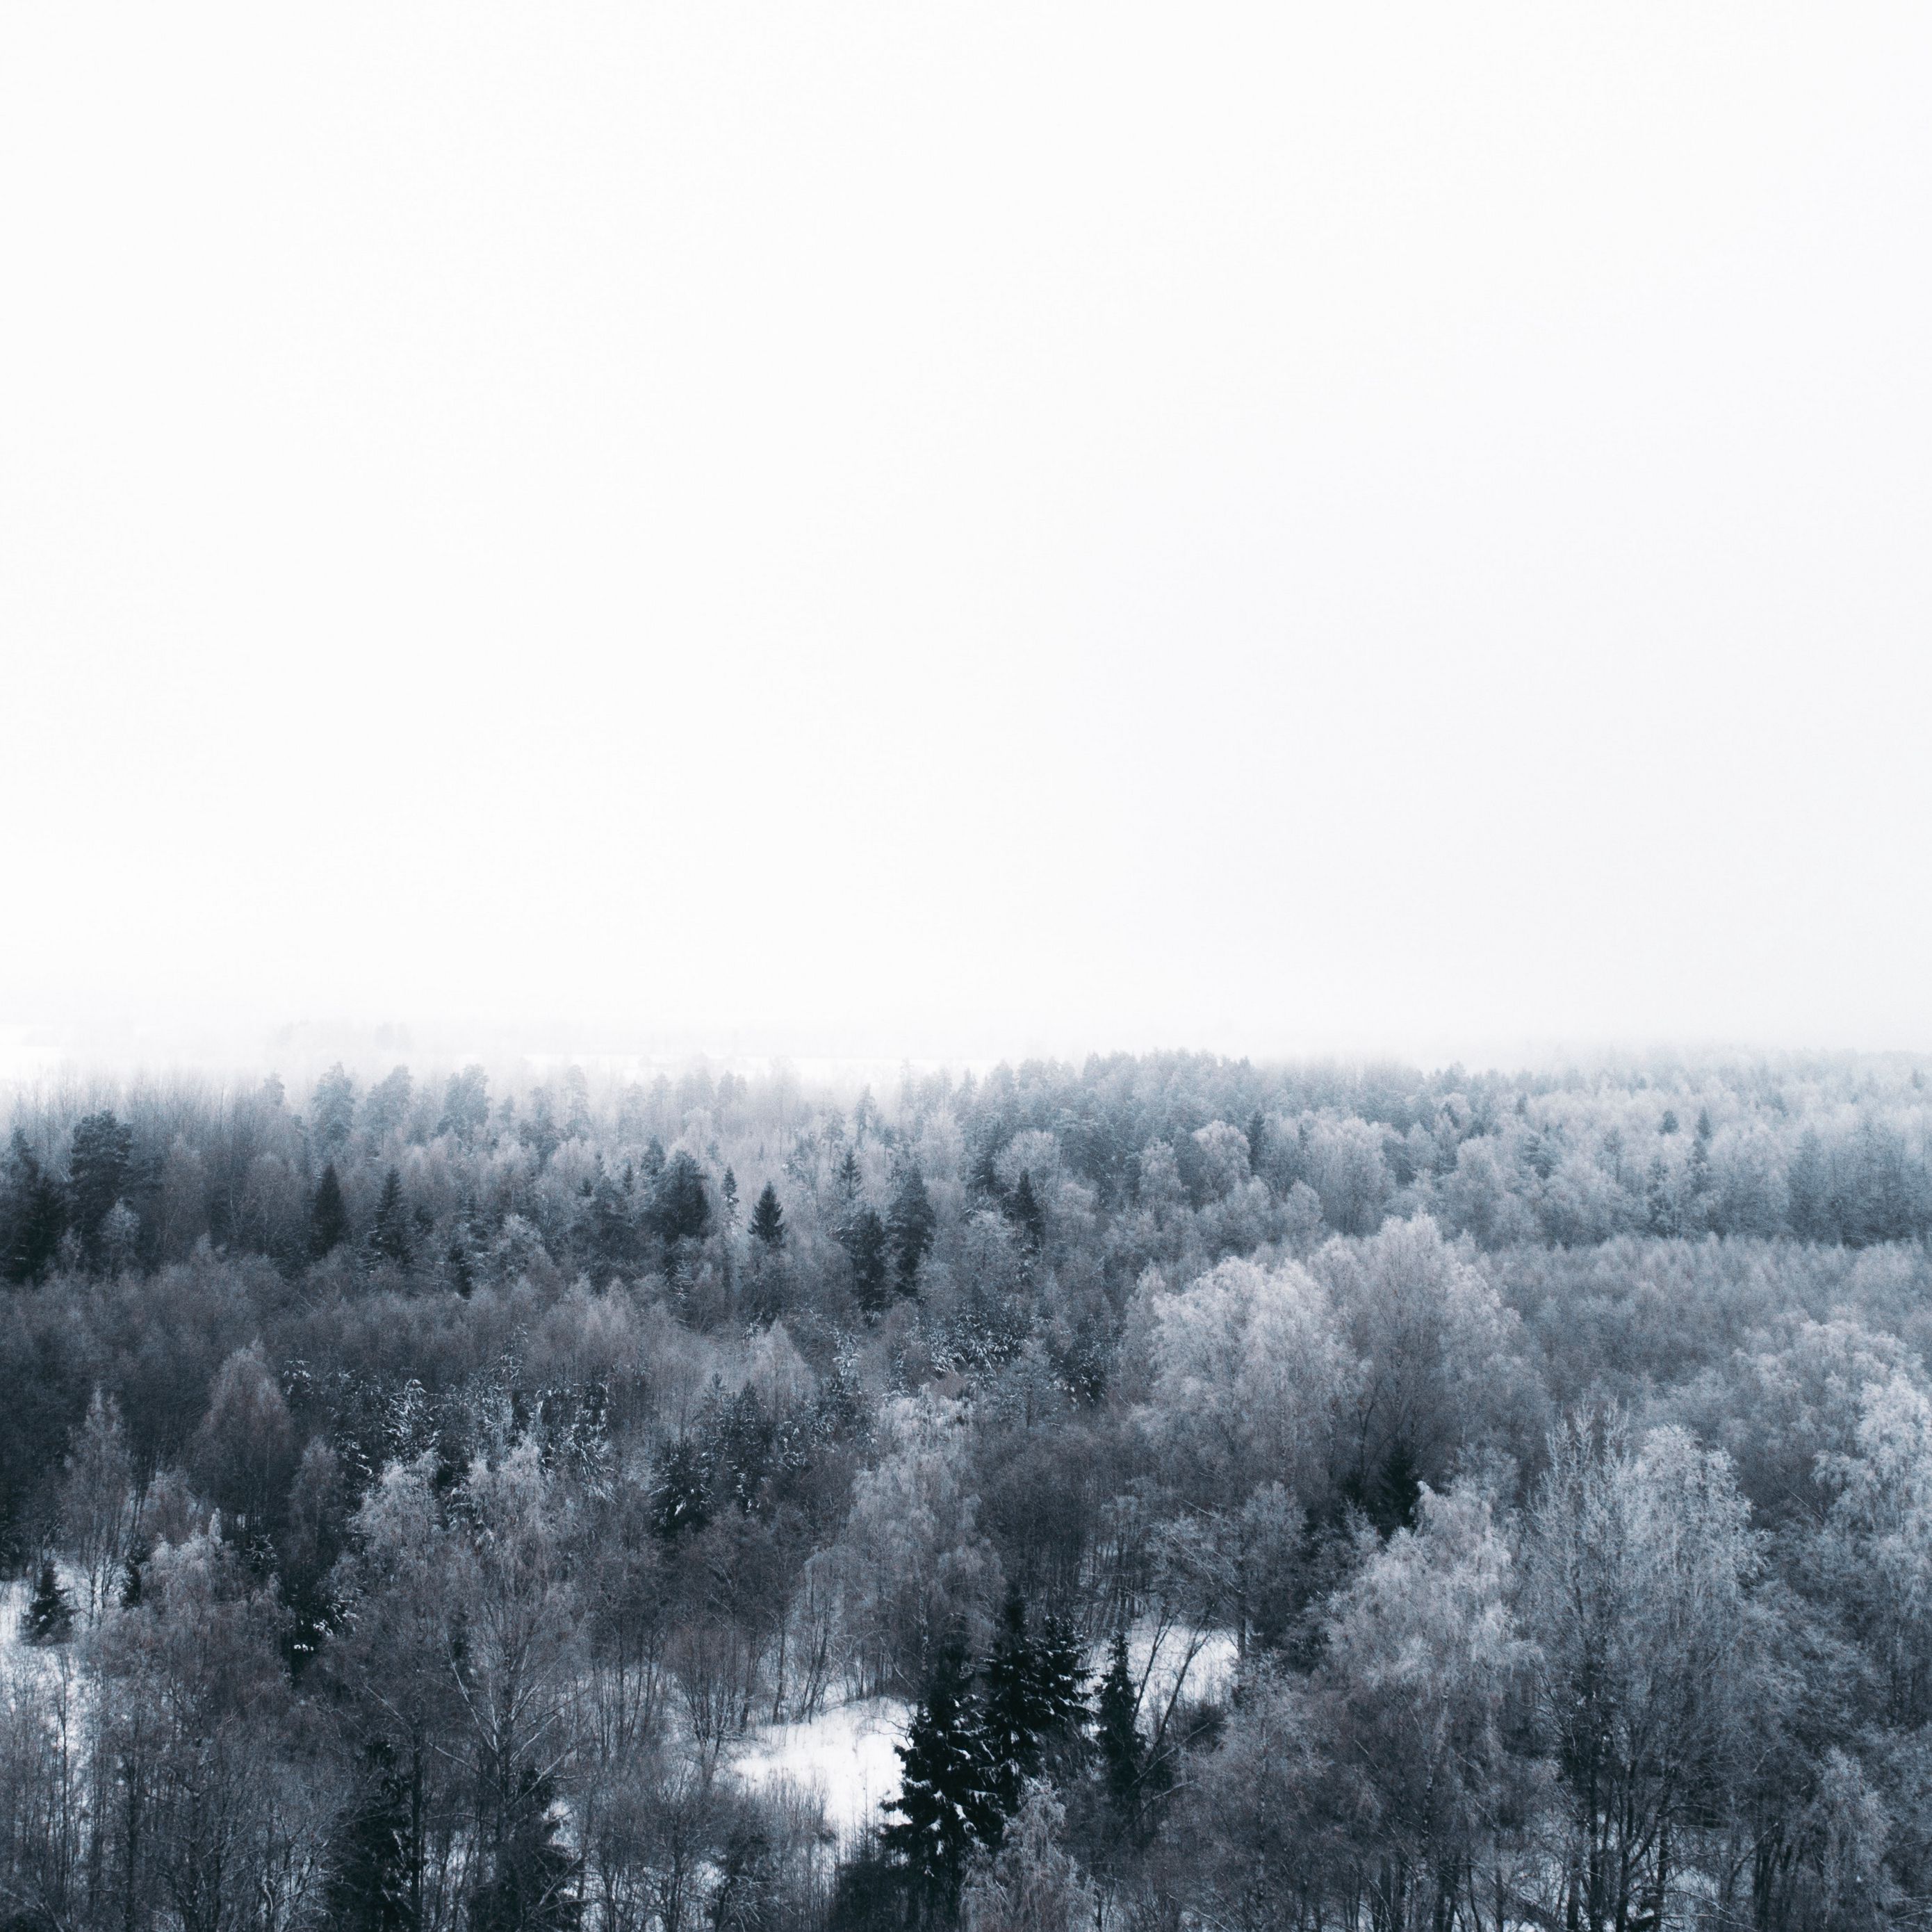 Download wallpaper 2780x2780 winter, trees, aerial view, minimalism, white ipad air, ipad air ipad ipad ipad mini ipad mini ipad mini ipad pro 9.7 for parallax HD background